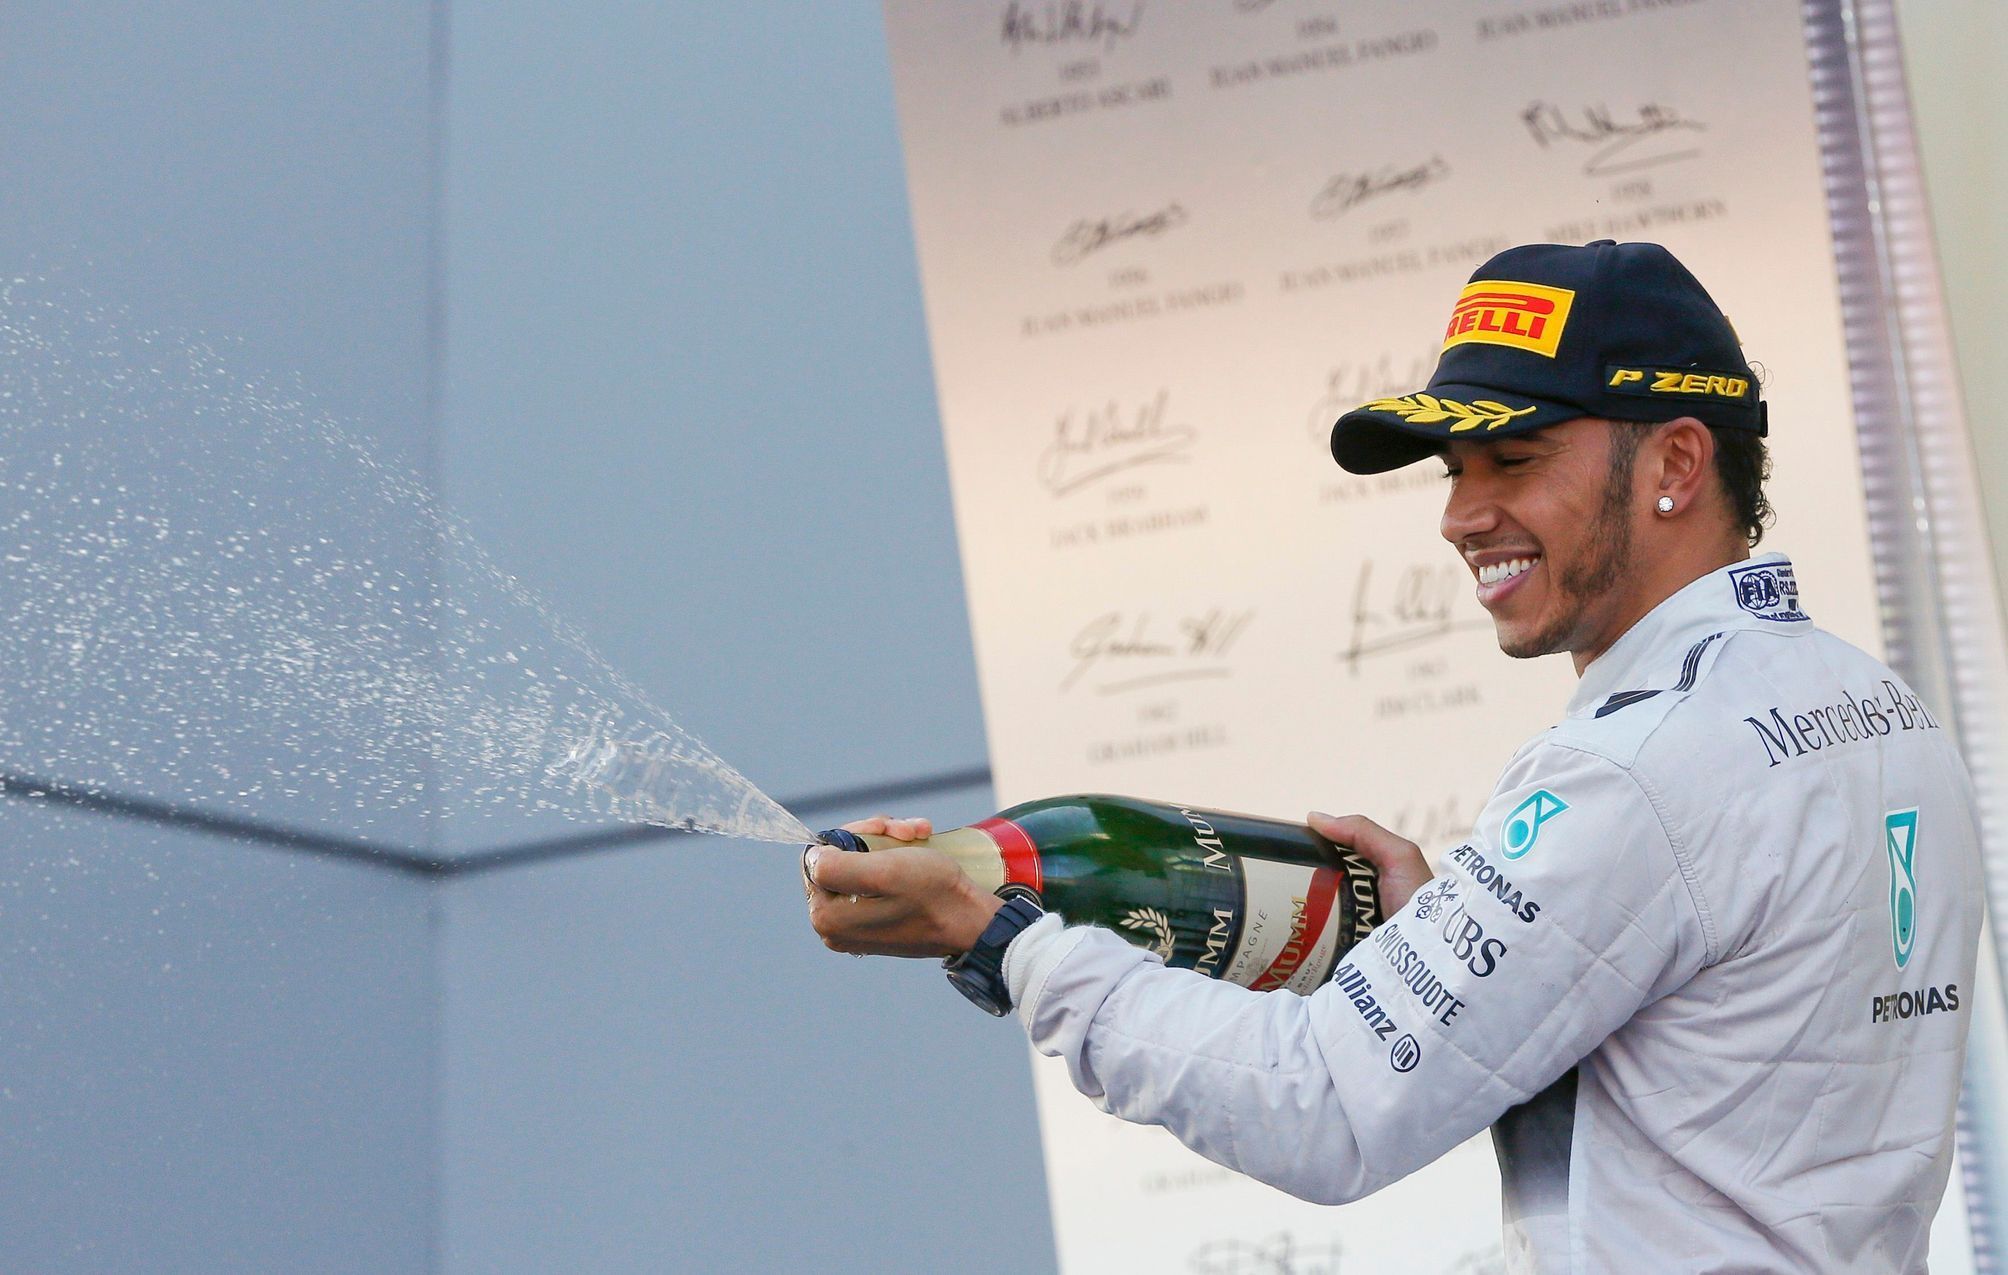 Mercedes Formula One driver Hamilton of Britain sprays champagne after winning  the first Russian Grand Prix in Sochi